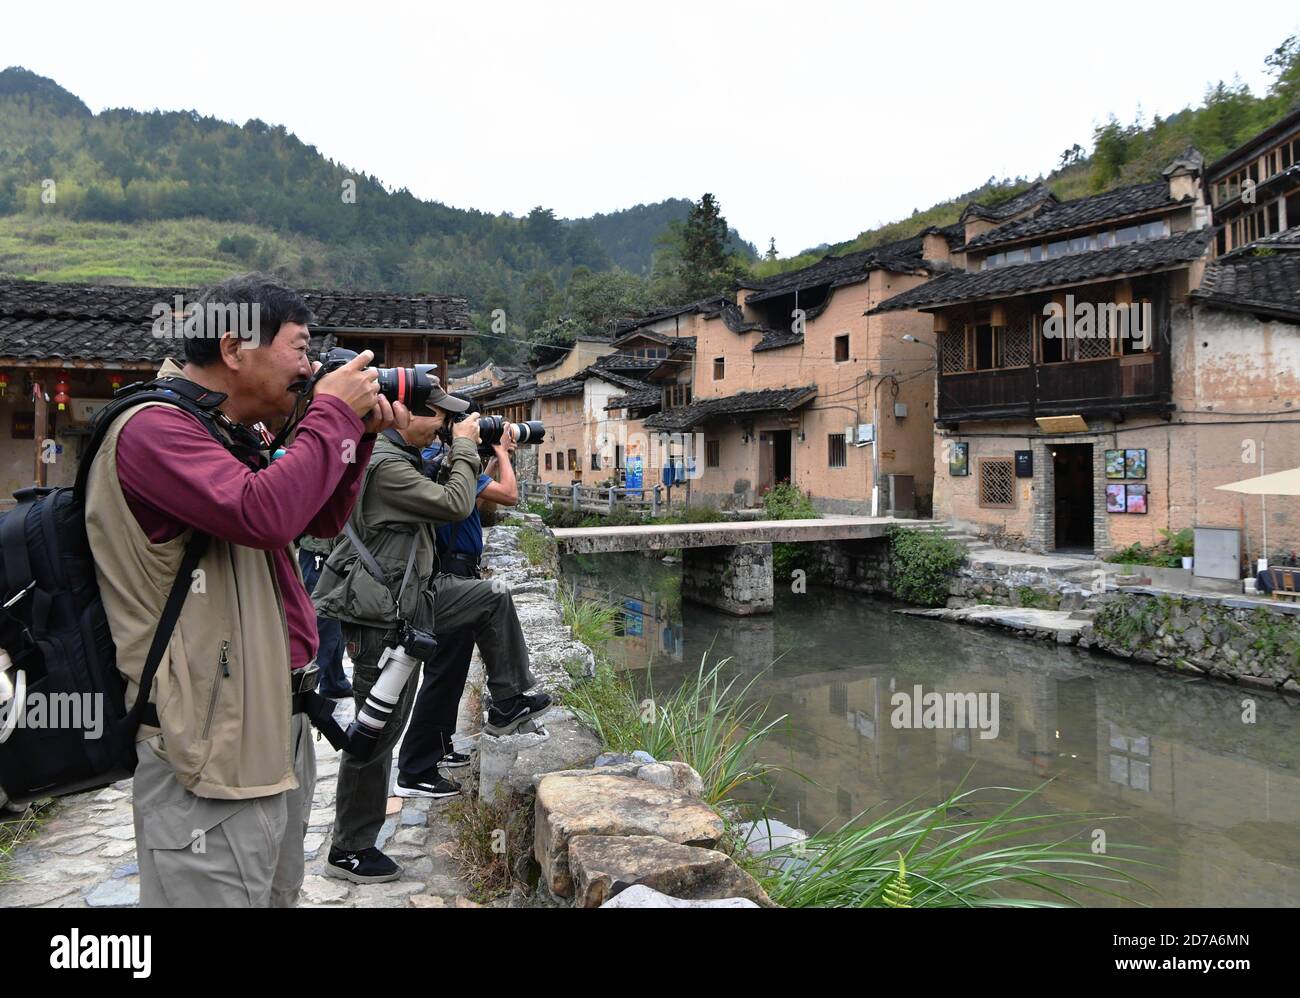 (201021) -- FUJIAN, Oct. 21, 2020 (Xinhua) -- People take photos in Longtan Village of Pingnan County in Ningde City, southeast China's Fujian Province, Oct. 21, 2020. Longtan Village had been a provincial-level poverty-stricken village due to lack of arable land. Villagers went out for work one after another with many old buildings left in disrepair. In 2017, the county government launched a project to boost ancient villages through cultural and creative industries. The old houses, once forgotten, have been connected to public utilities, reinforced and decorated inside, with the ancient appe Stock Photo